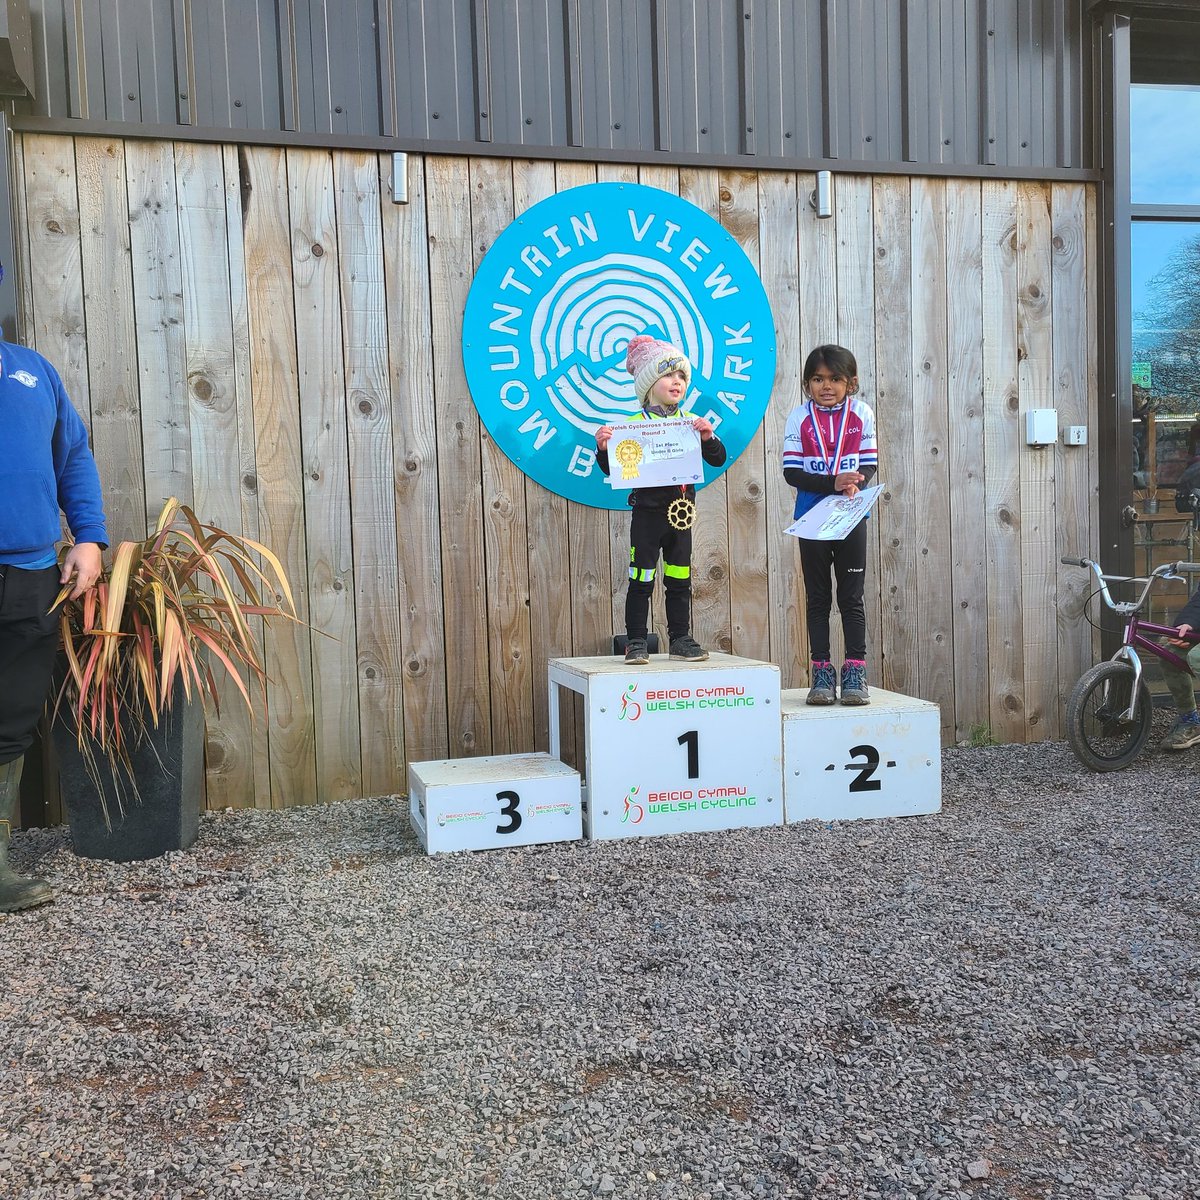 Another win for little Daisy today at cyclo-cross in the U6 category! #win #cycling #cyclocross #age4 https://t.co/ljHj88MSUr.